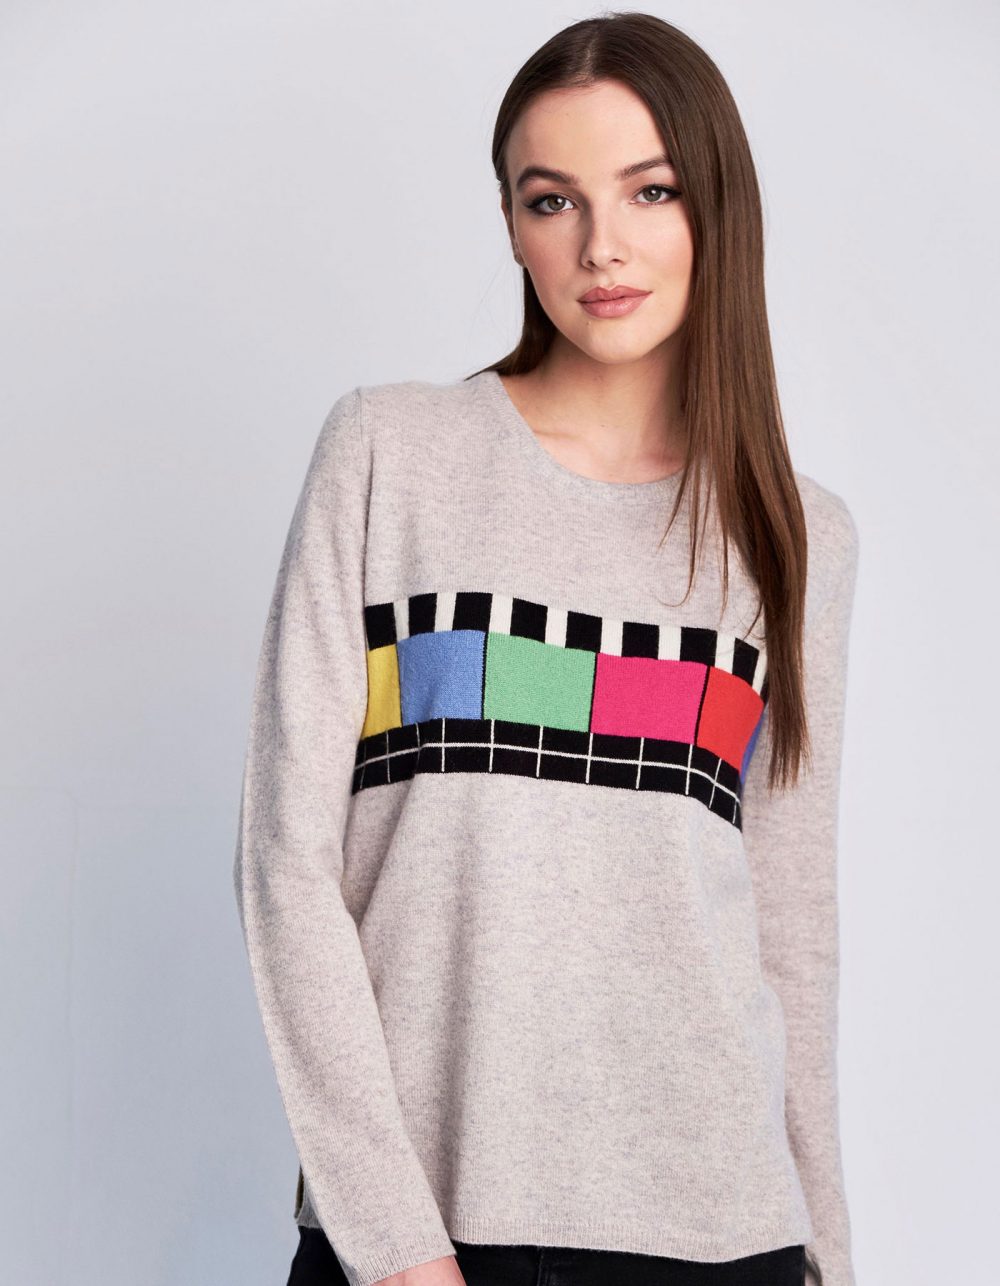 A malin darlin Test Bild Marl womens cashmere jumper with crew neck and no signal TV pattern across the front.